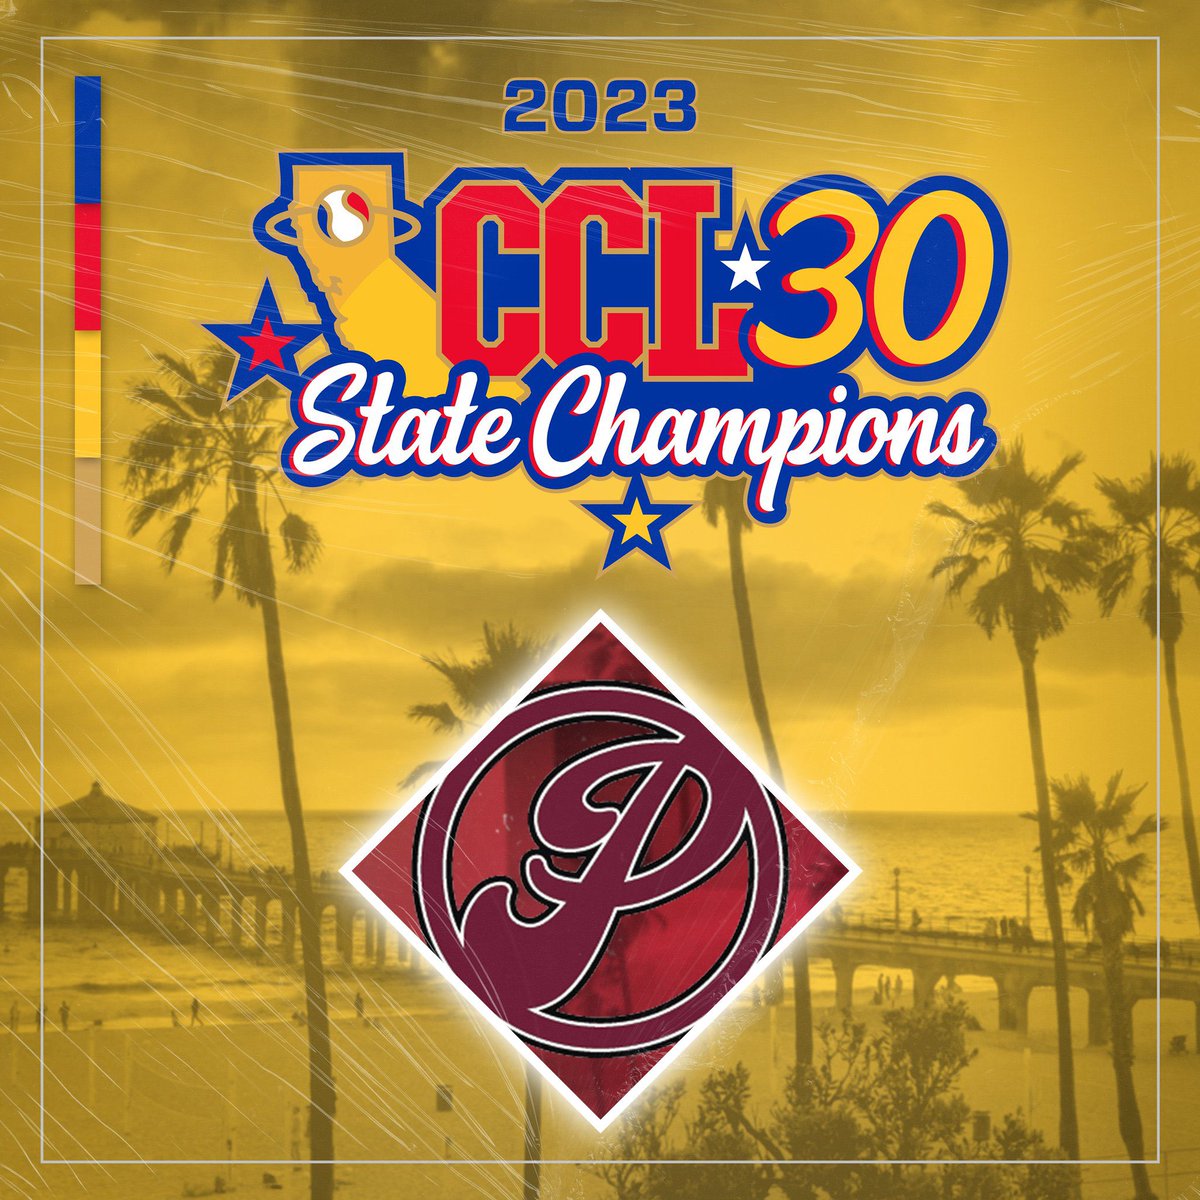 THE THREE-PEAT IS SECURED. THE @PrunePackers ARE THE 2023 CCL 30 STATE CHAMPIONS! 🙌

🏆🏆🏆 ✅

#CCL30Years #CCLBaseball